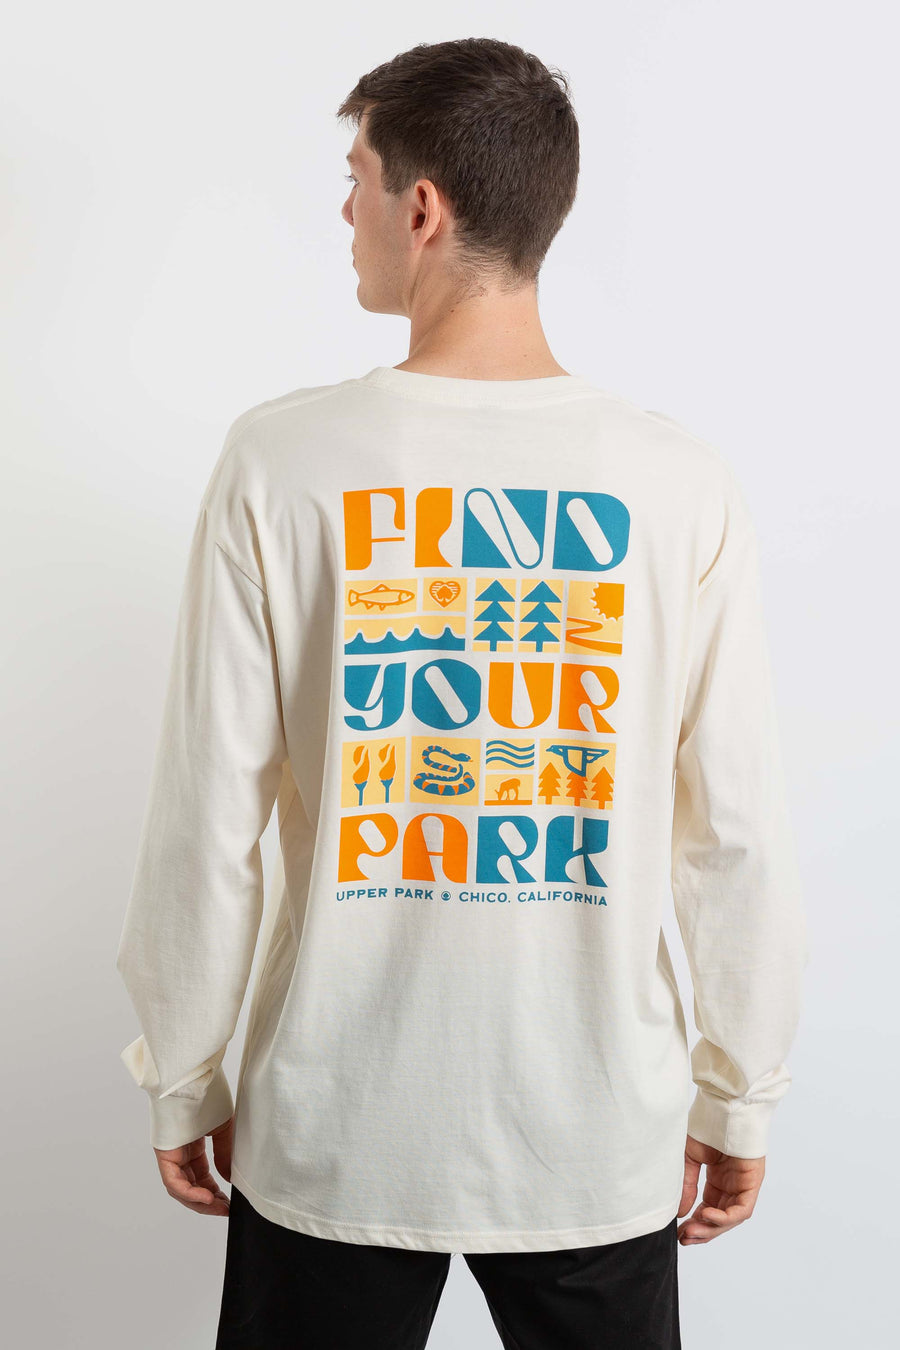 Find Your Park Long Sleeve Shirt